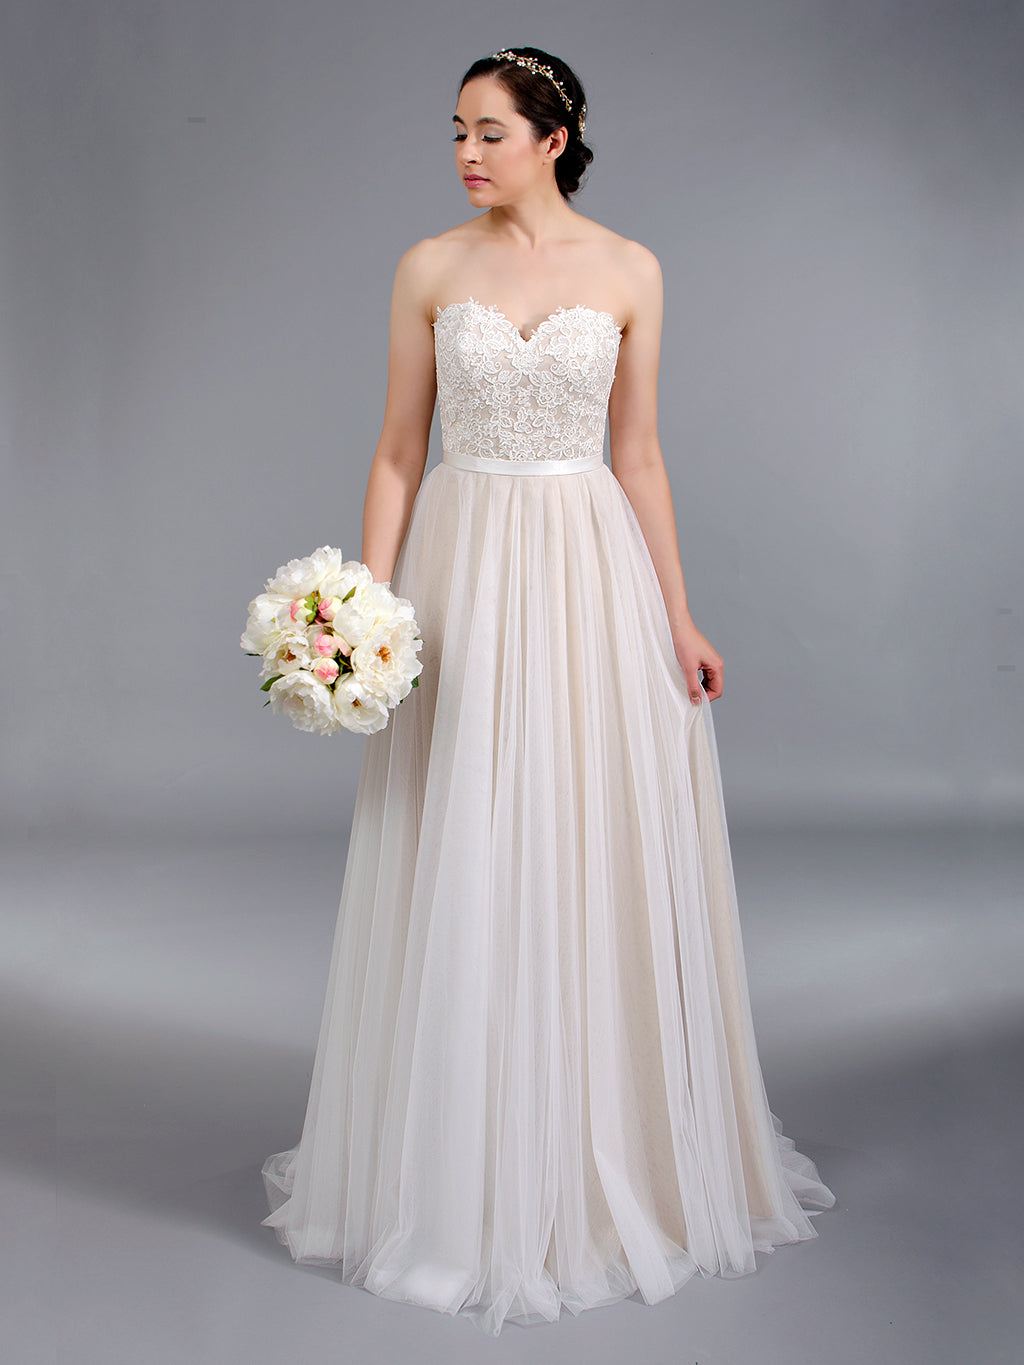 Ivory strapless lace wedding dress with tulle skirt 4052